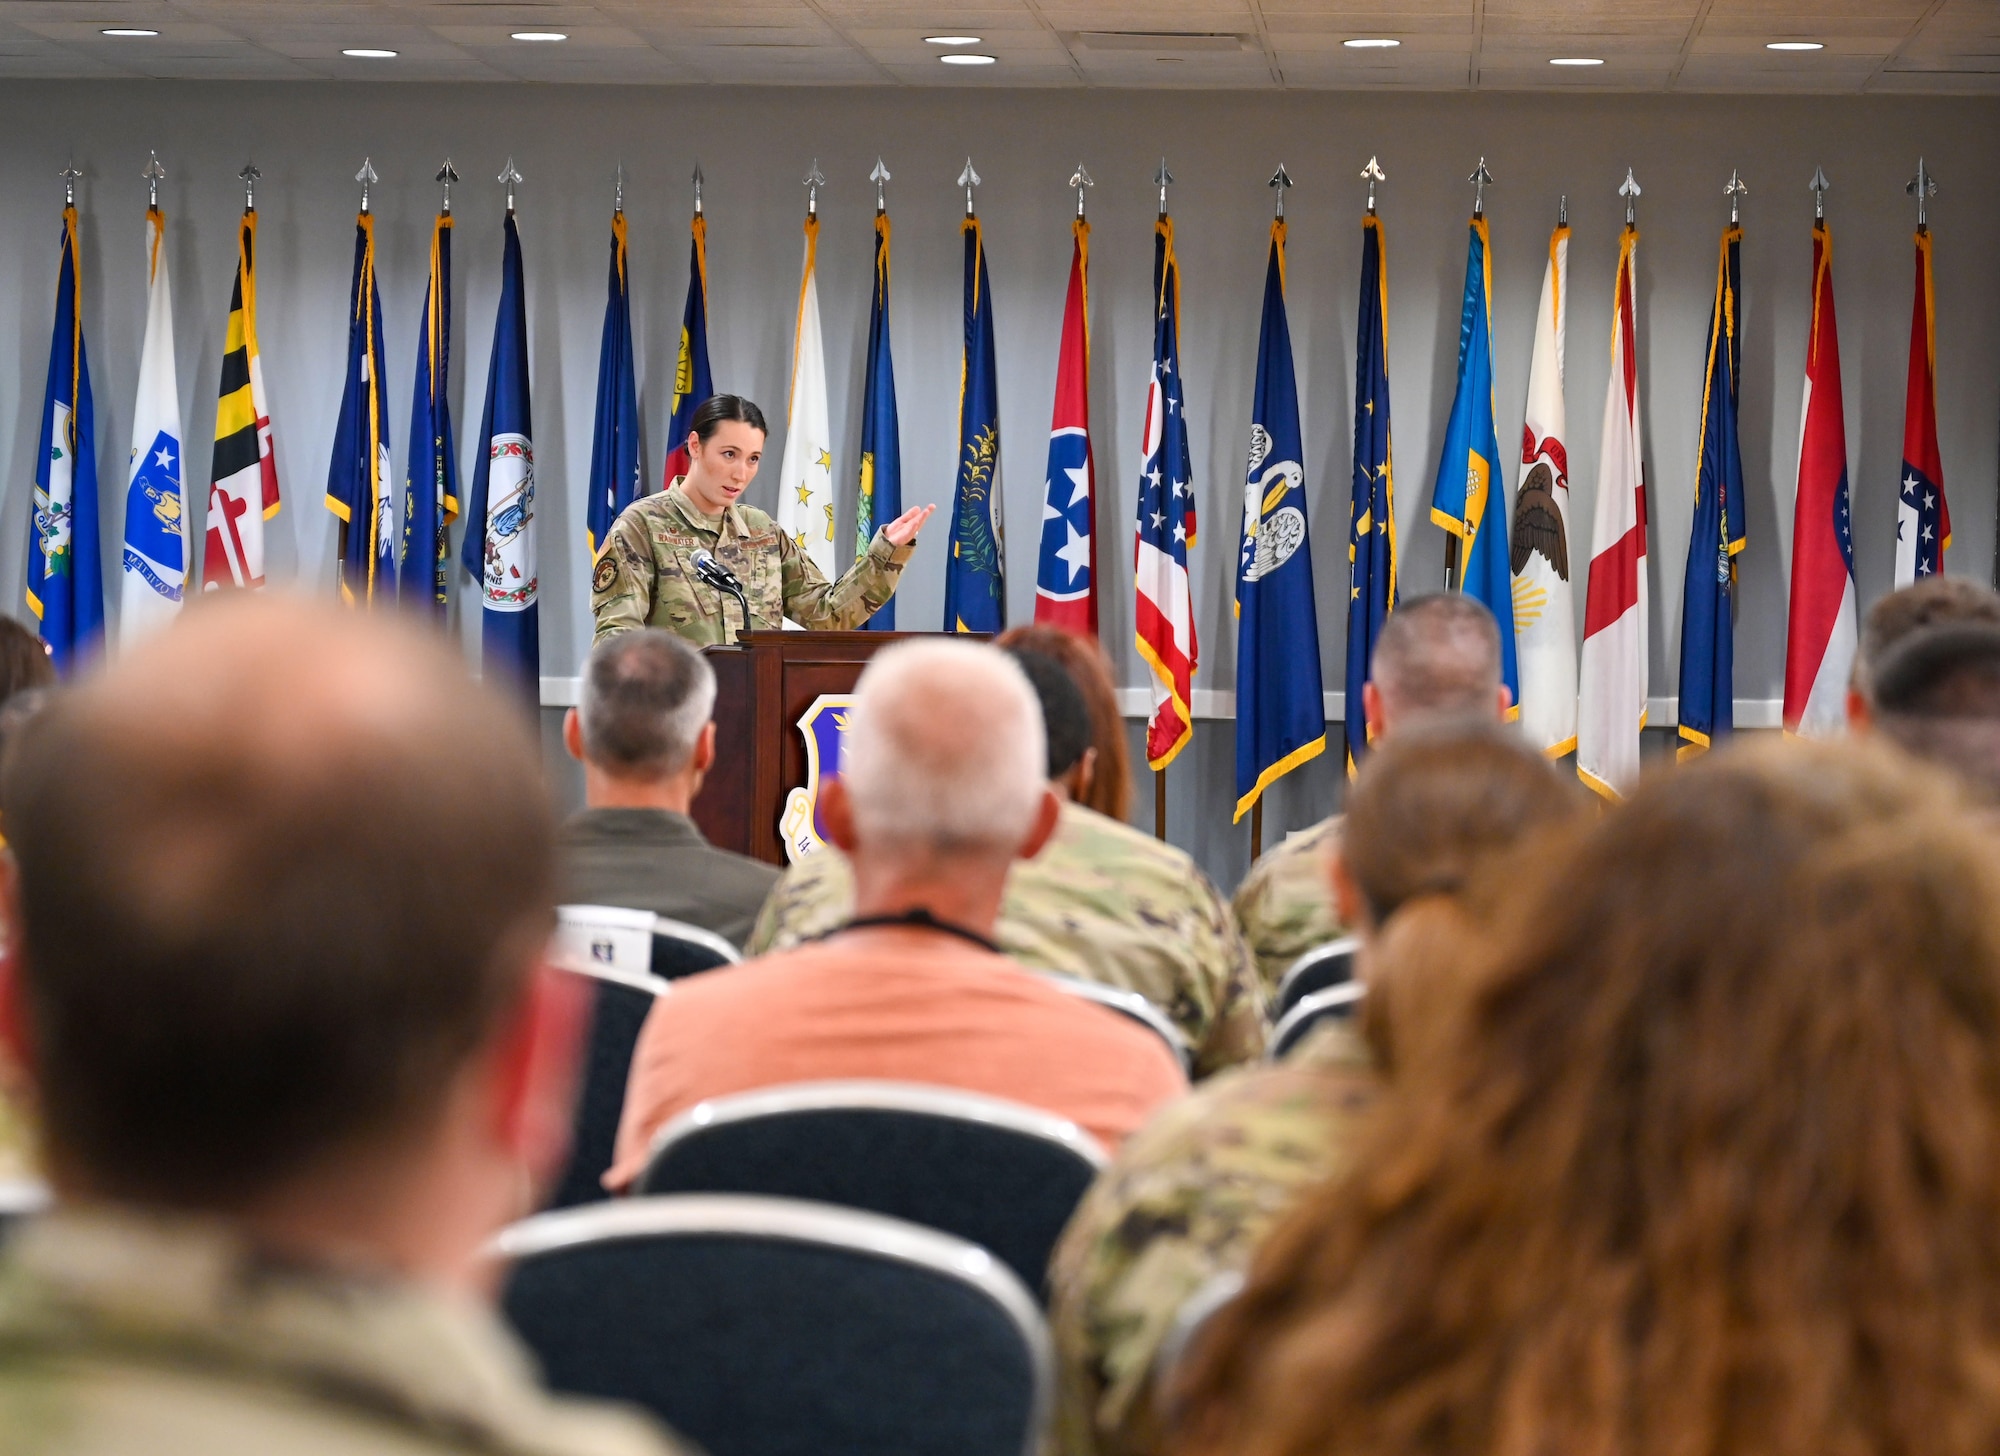 Maj. Elizabeth Rainwater, 14th Communications Squadron commander, speaks at the Asian American and Pacific Islander Heritage Month Observance on May 19, 2022, at Columbus Air Force Base, Miss. This month was specifically chosen to commemorate the arrival of the first Japanese immigrants to the United States on May 7, 1843, and the completion of the transcontinental railroad, which was built by mostly Chinese immigrants, on May 10, 1869. (U.S. Air Force photo by Senior Airman Davis Donaldson)